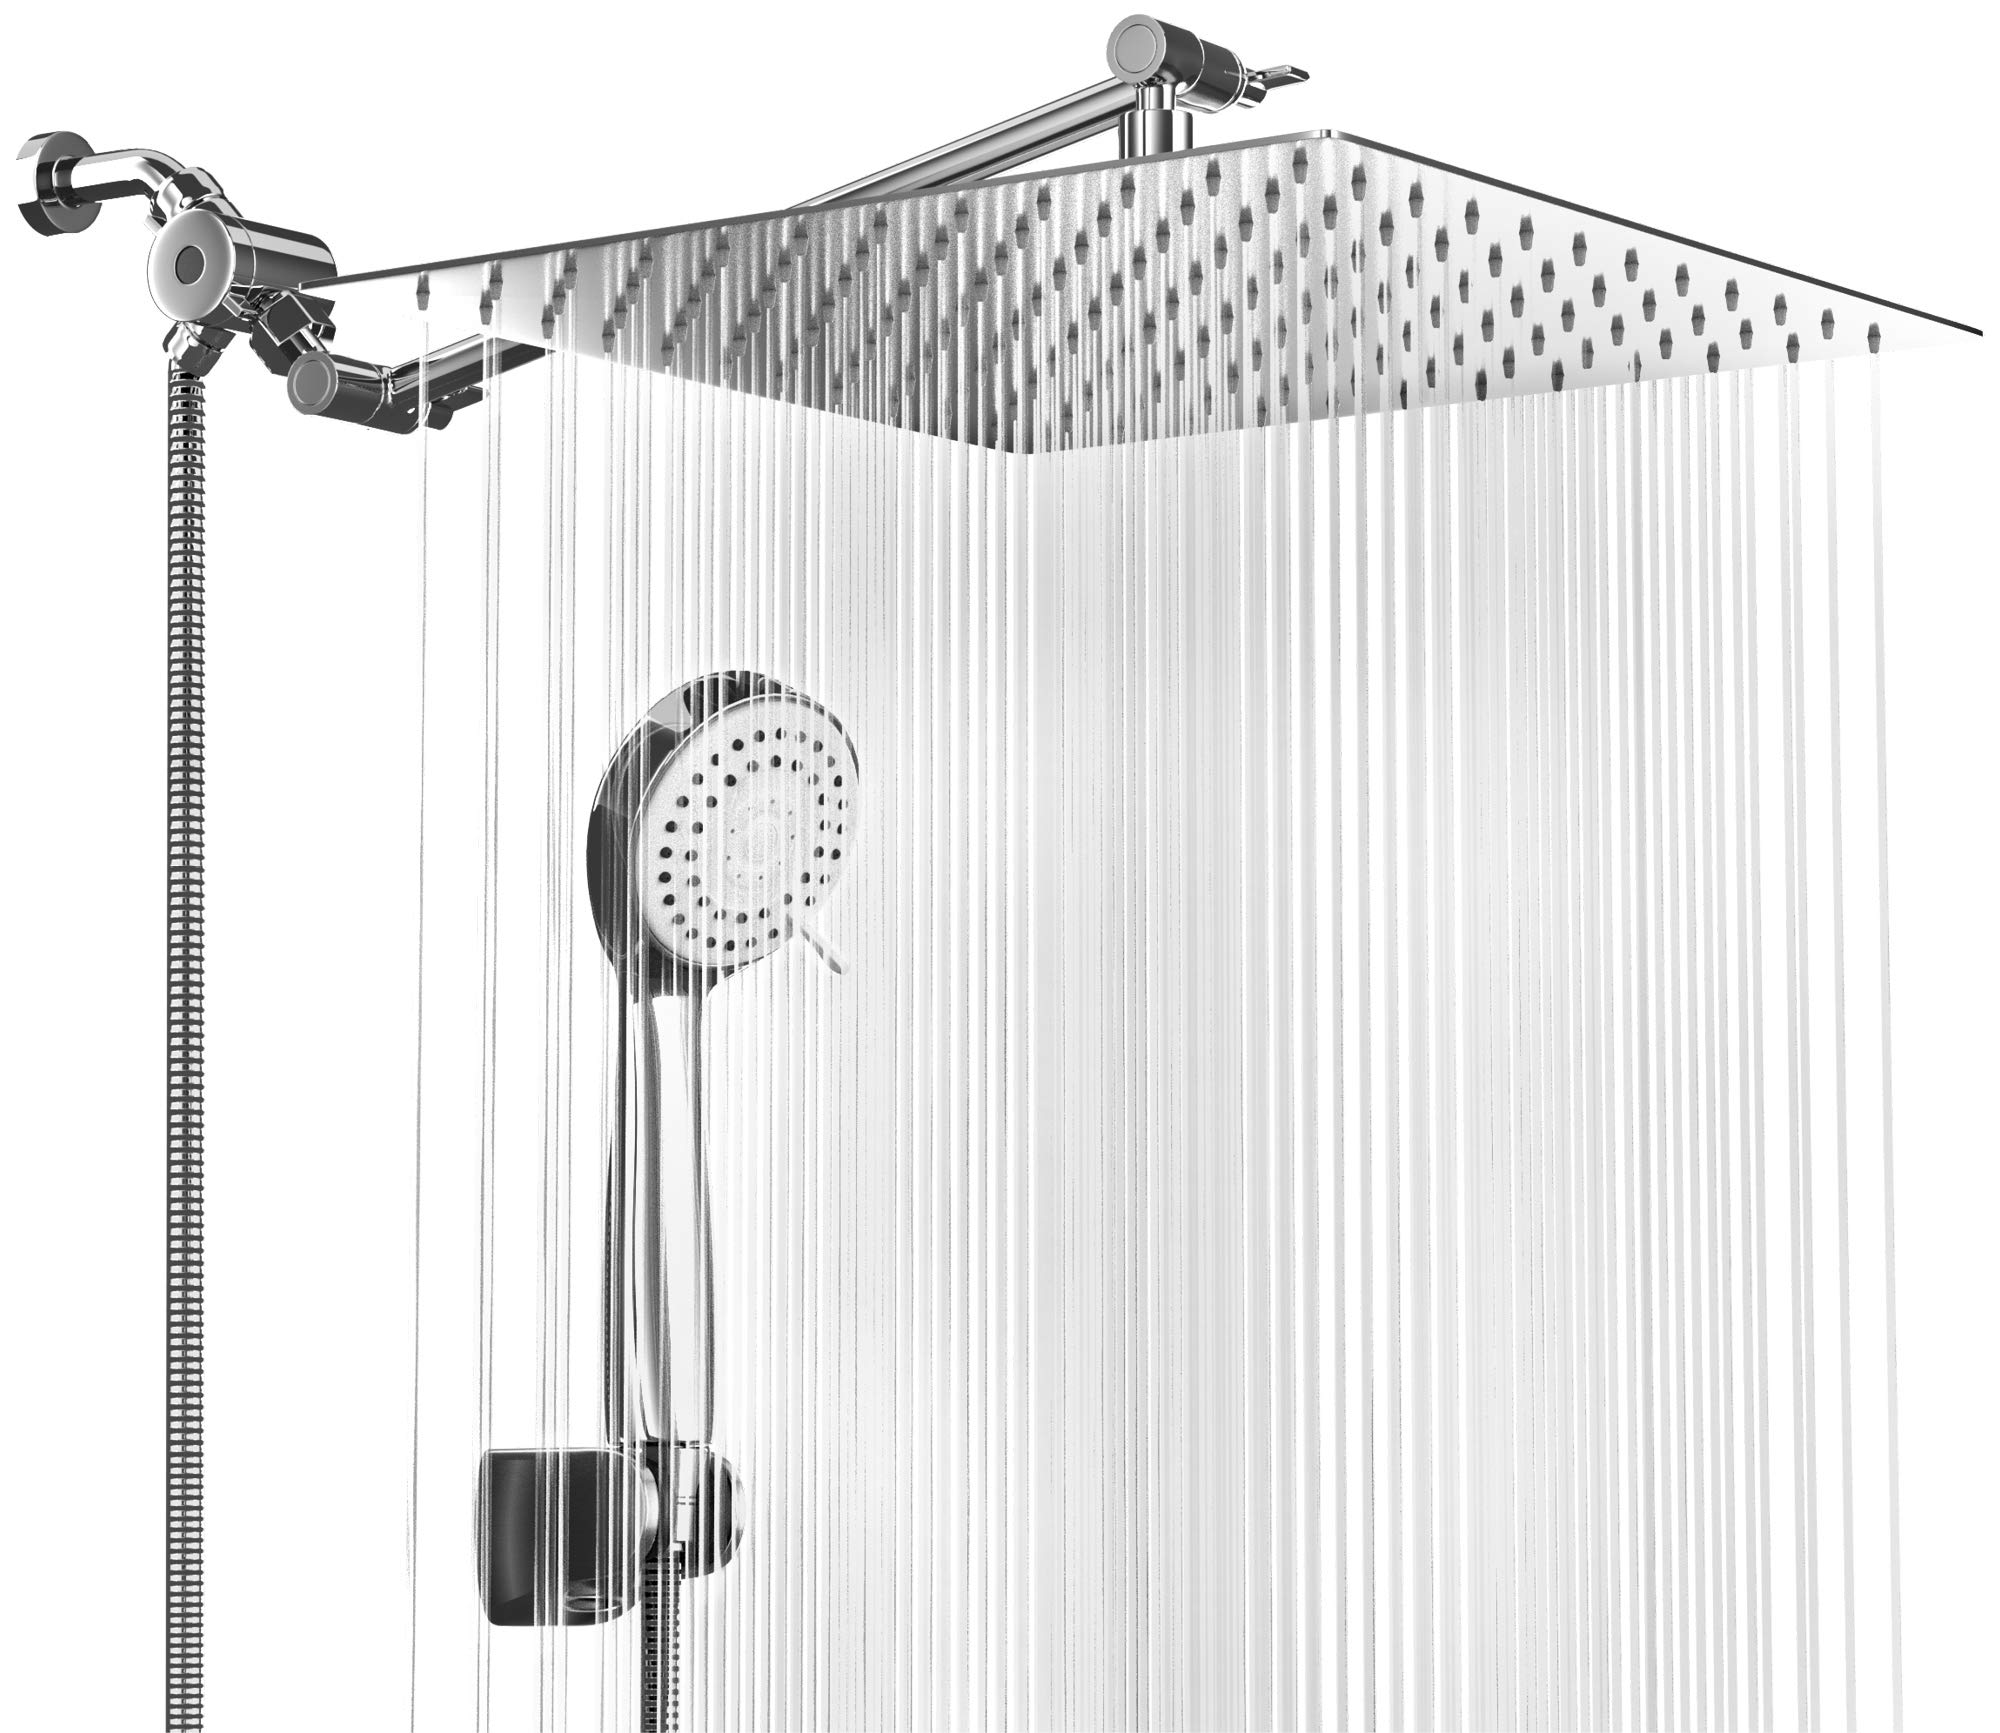 High Pressure Rainfall Shower Head and Hand Held Shower Head Combo with 70 Inch Hose for Bath and Adjustable Extender Arm - Easy Install Anti Clog Jet Nozzles - Universal Fit for High, Low Water Flow  - Very Good